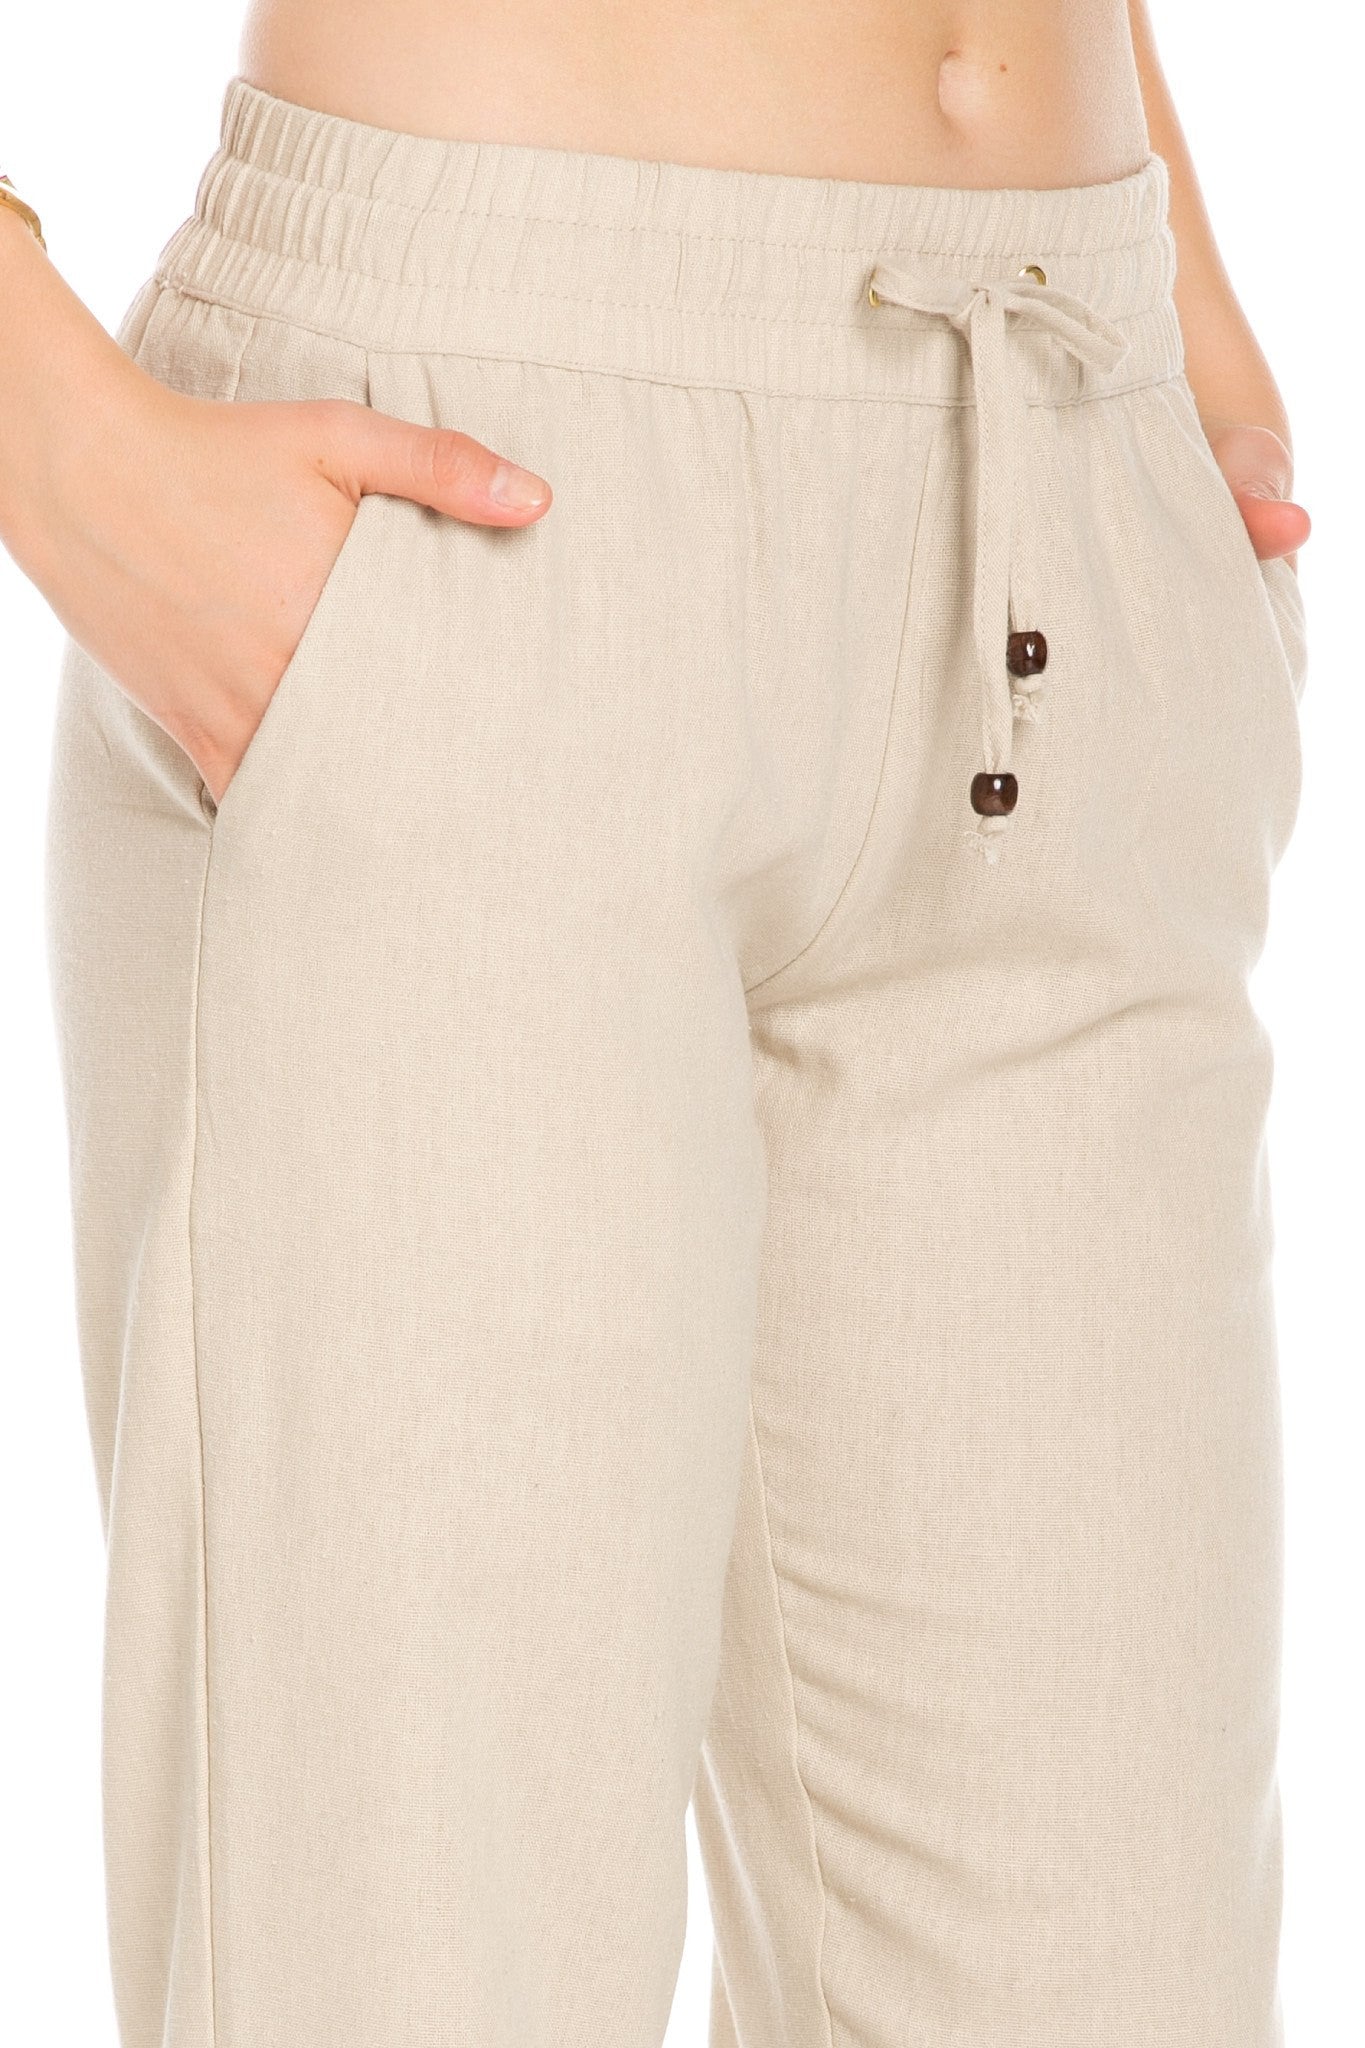 Comfy Drawstring Linen Pants Long with Band Waist (Natural) - Poplooks